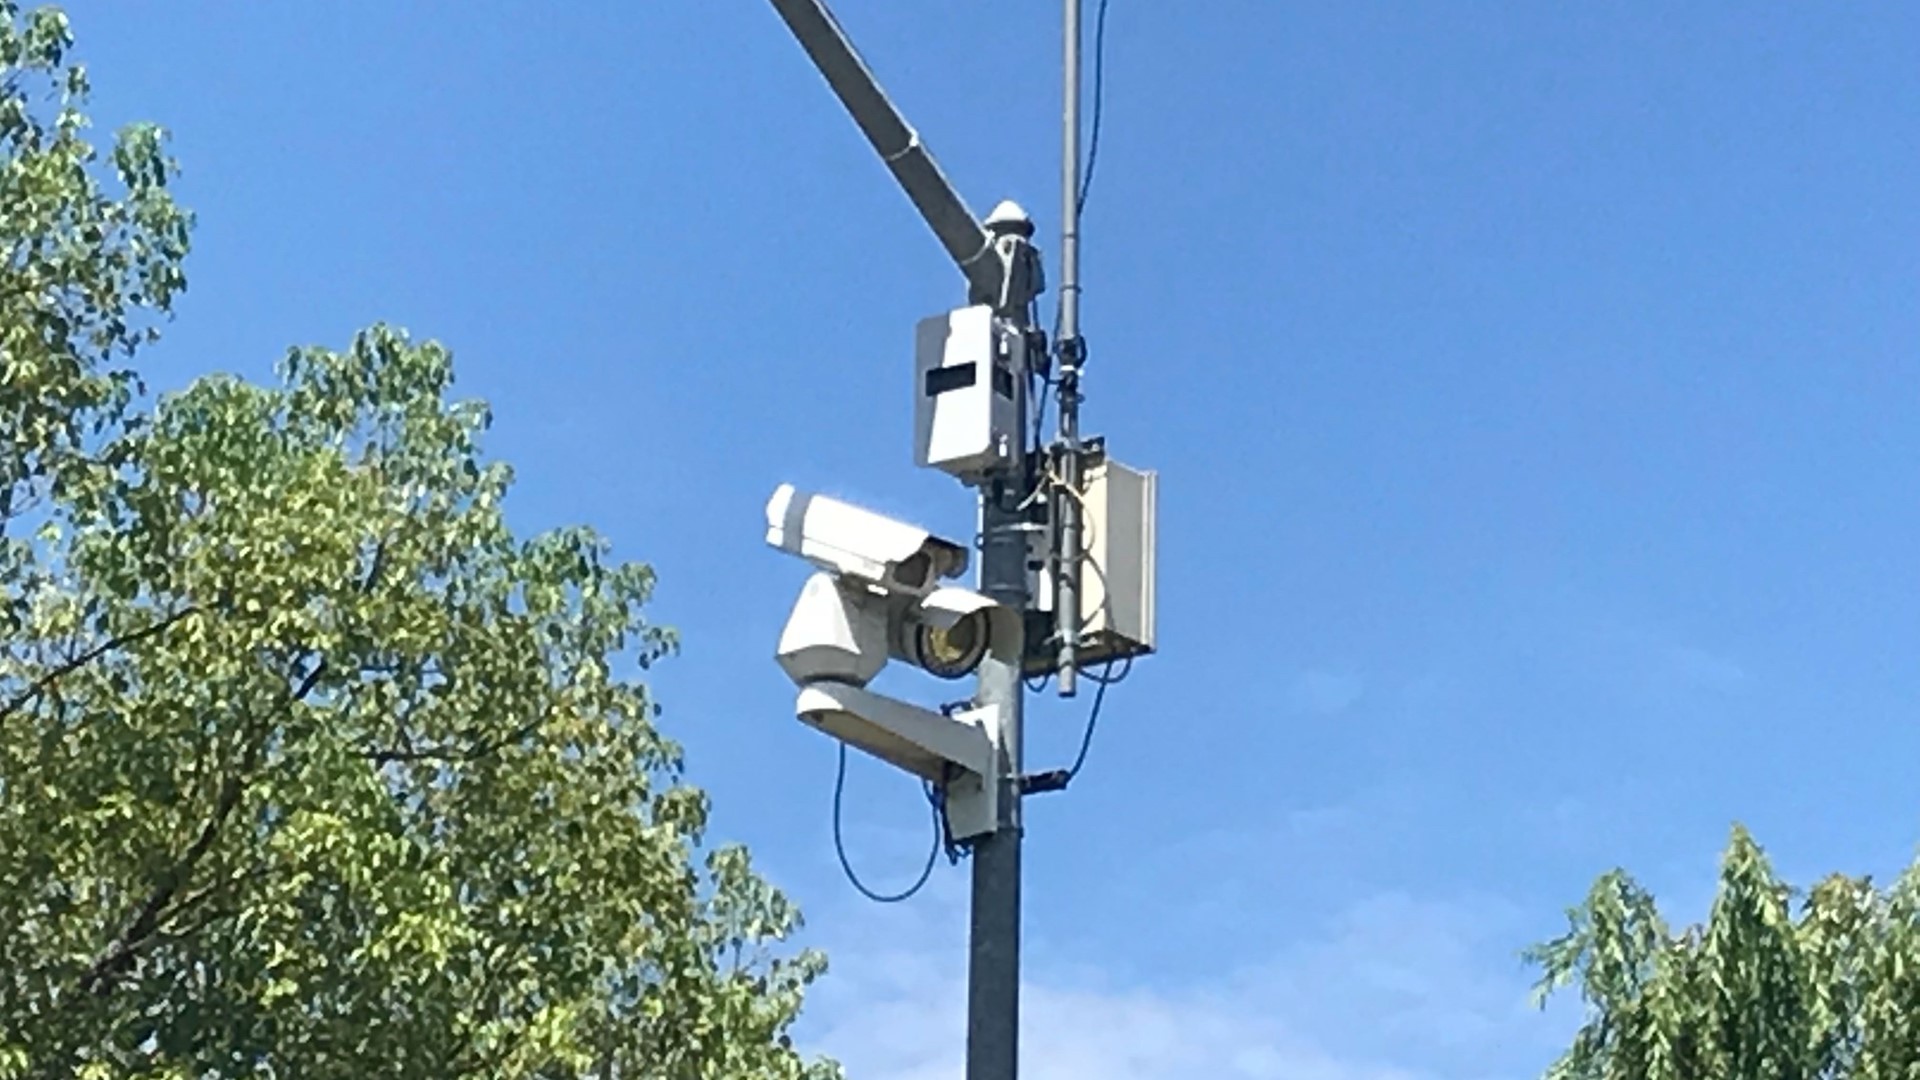 The cameras surrounding Gretchen Talley Park, where 64-year-old Parmjit Singh was killed, weren't working on Sunday. And police told ABC10 they haven't worked for years.